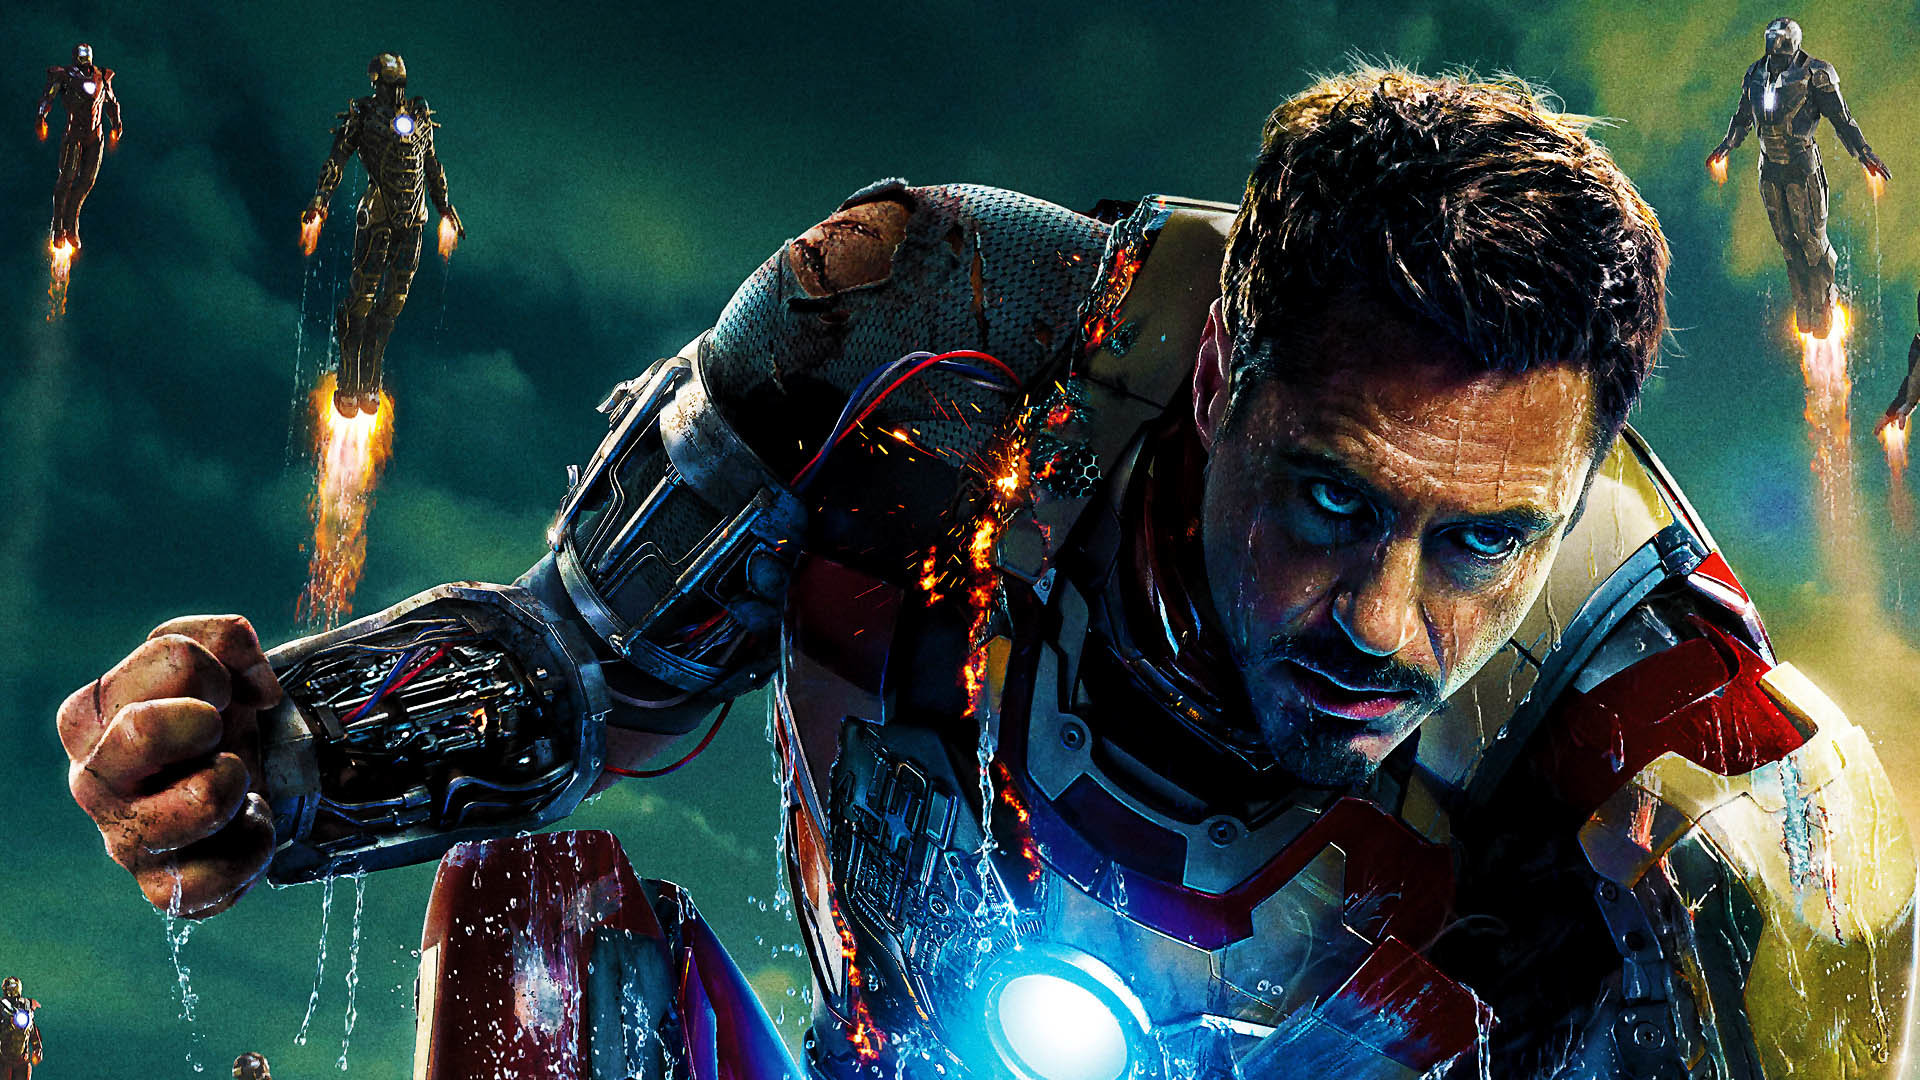 Iron Man 3 Wallpapers Hd For Desktop Backgrounds